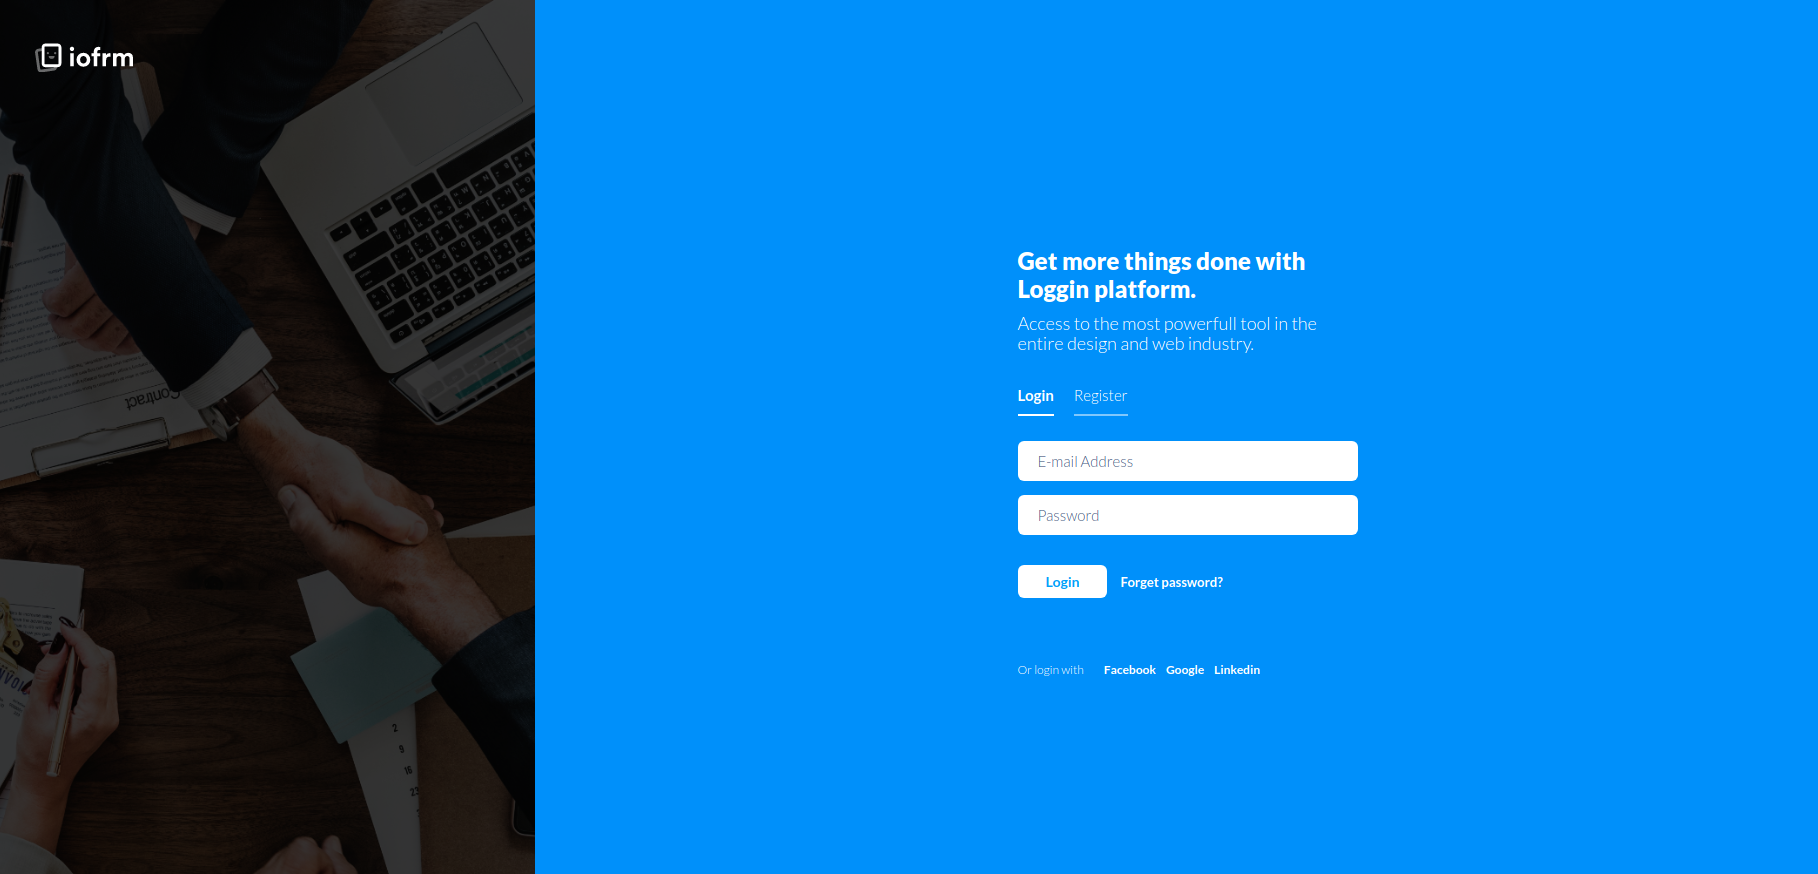 This is the login page of iofrm bootsrap 4 template